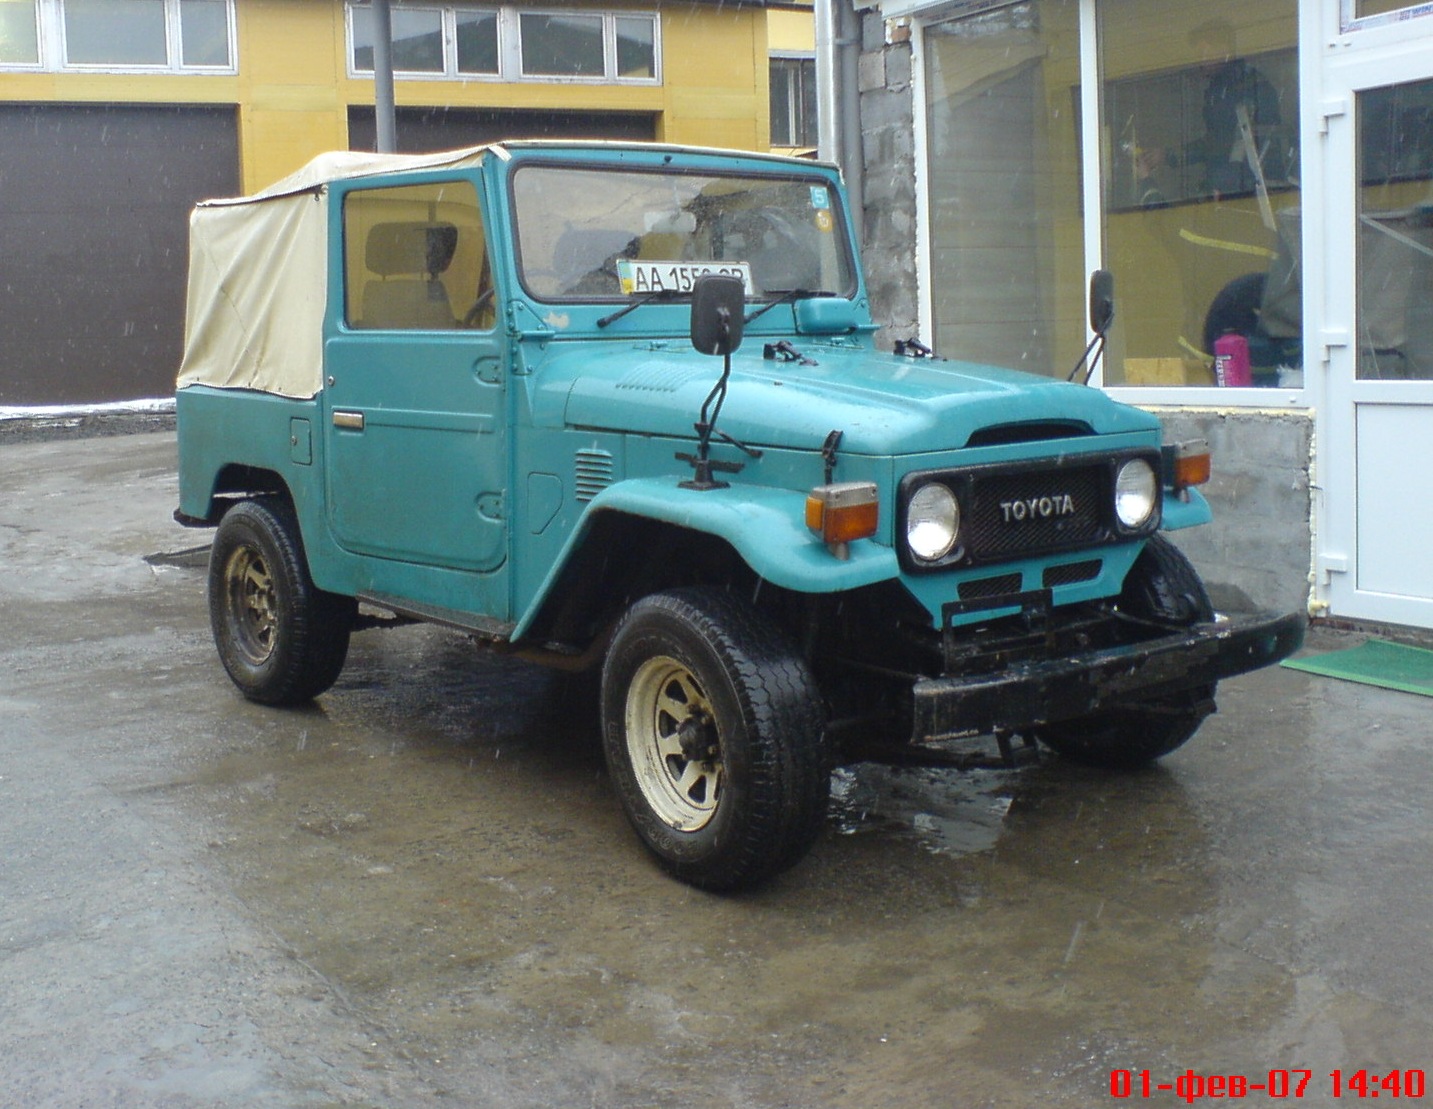 The beginning of the second life - Toyota Land Cruiser 30L 1978